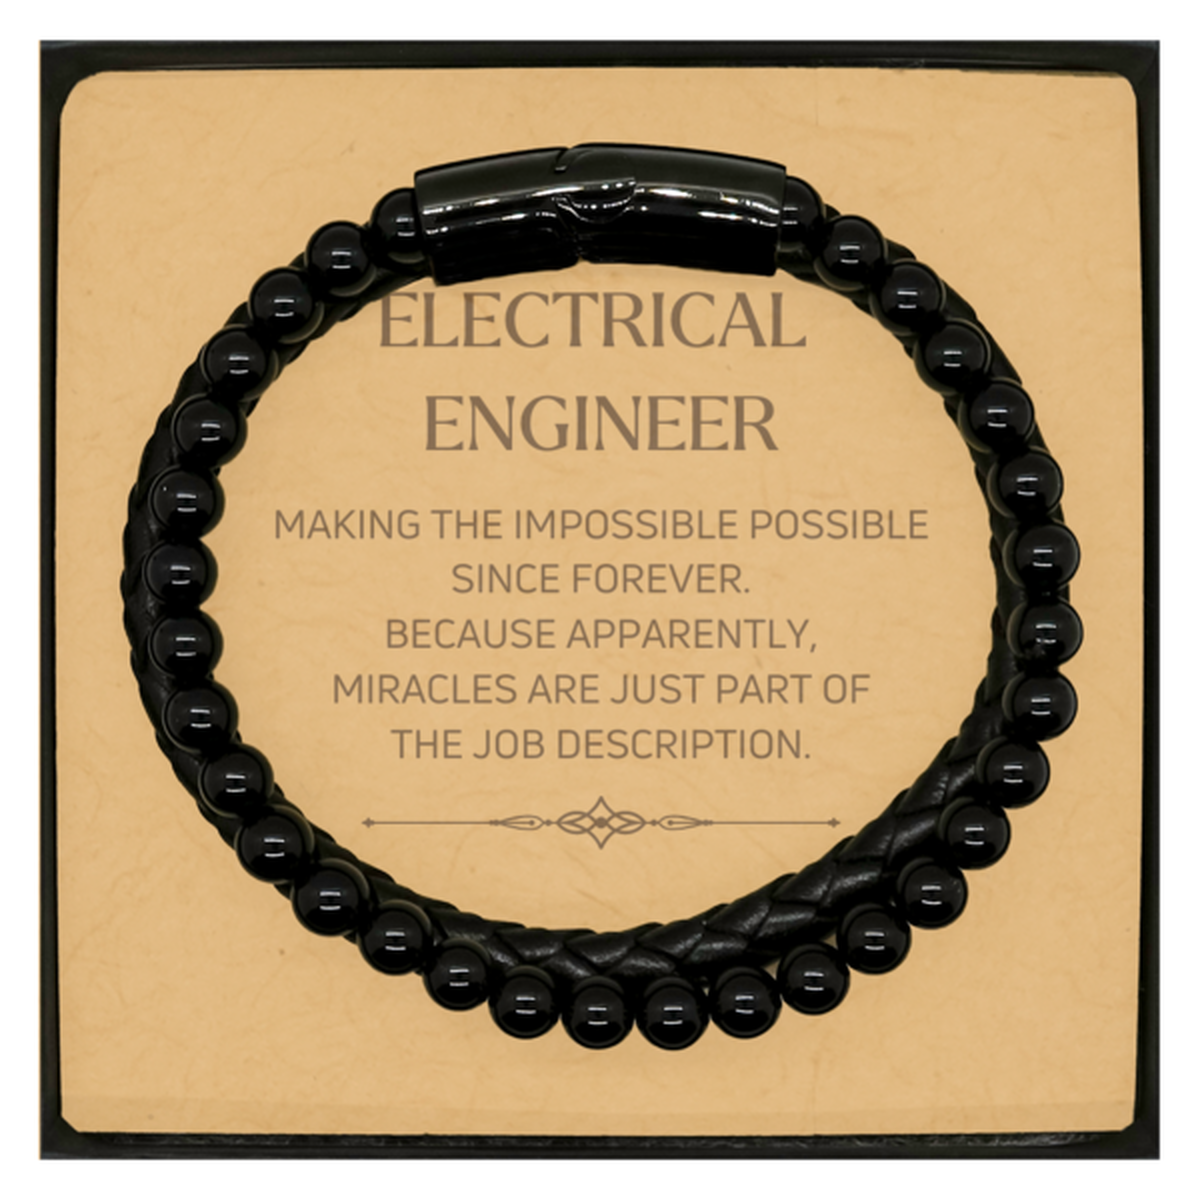 Funny Electrical Engineer Gifts, Miracles are just part of the job description, Inspirational Birthday Christmas Stone Leather Bracelets For Electrical Engineer, Men, Women, Coworkers, Friends, Boss